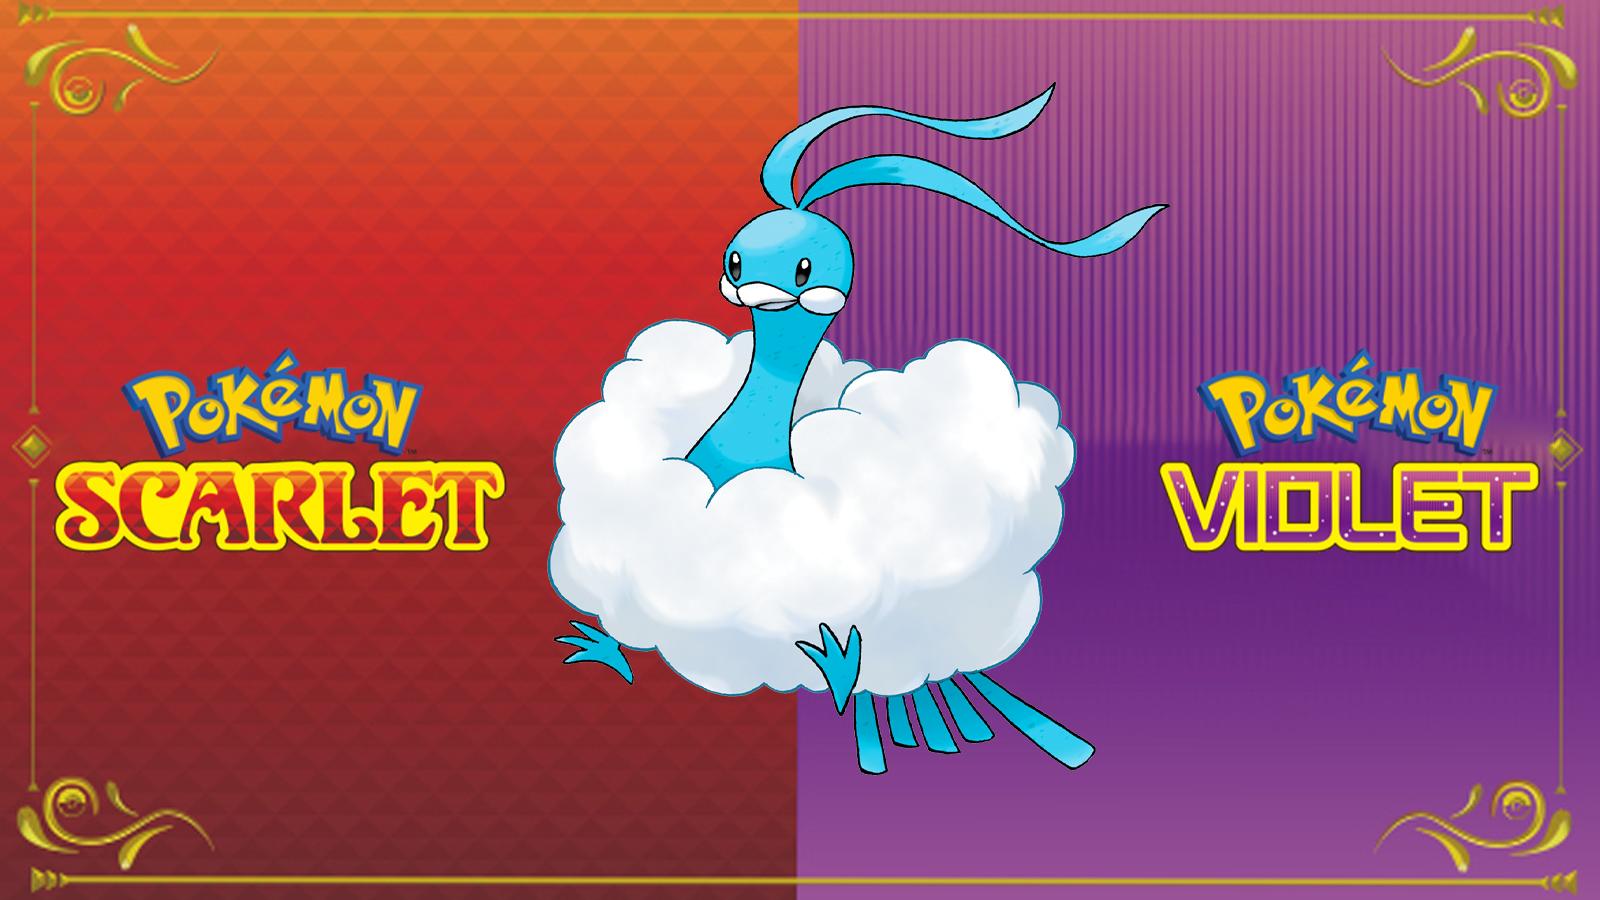 Swablu and Altaria in Pokemon Scarlet and Violet